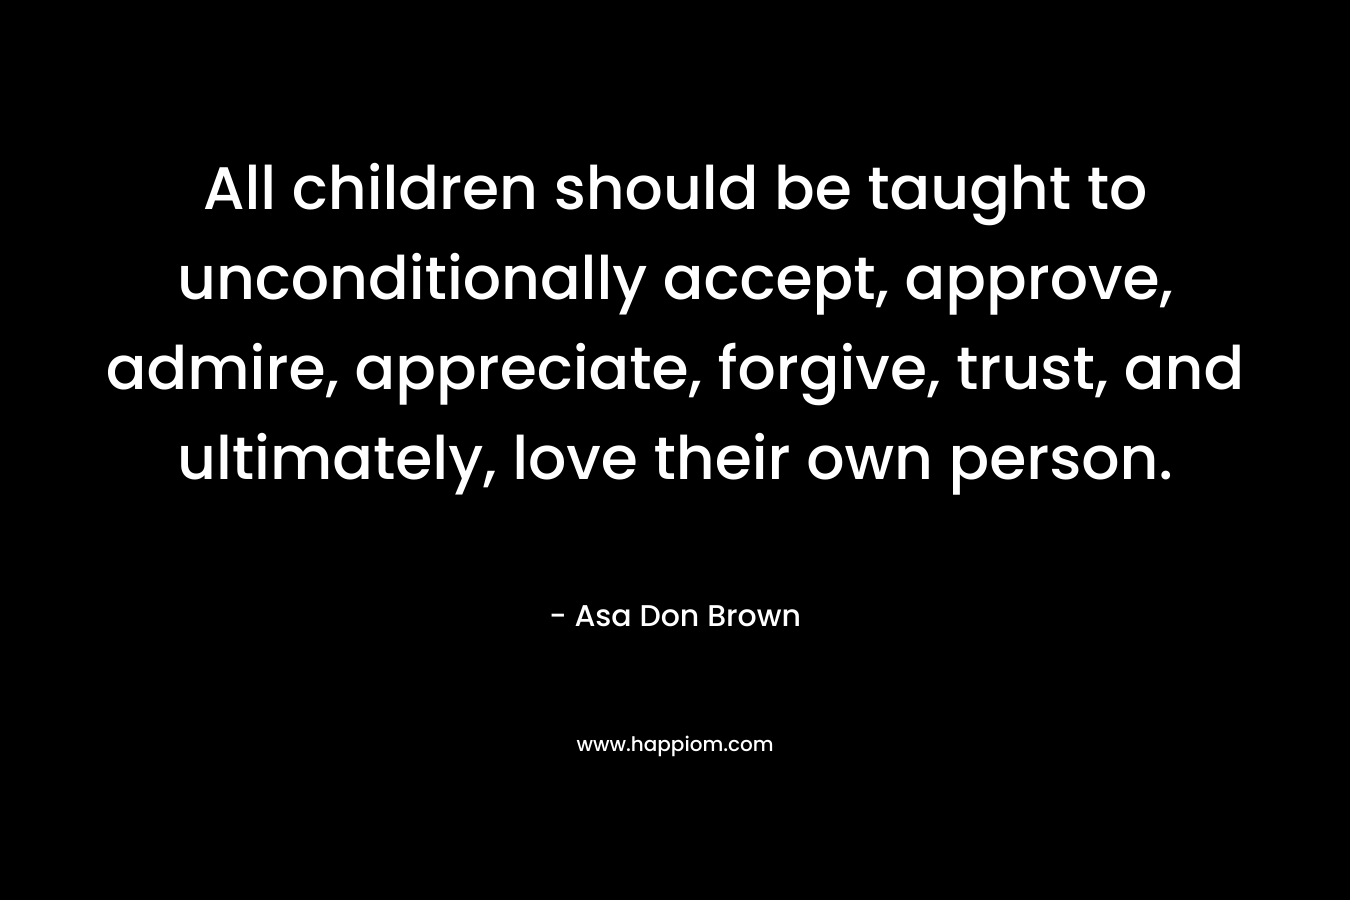 All children should be taught to unconditionally accept, approve, admire, appreciate, forgive, trust, and ultimately, love their own person. – Asa Don Brown